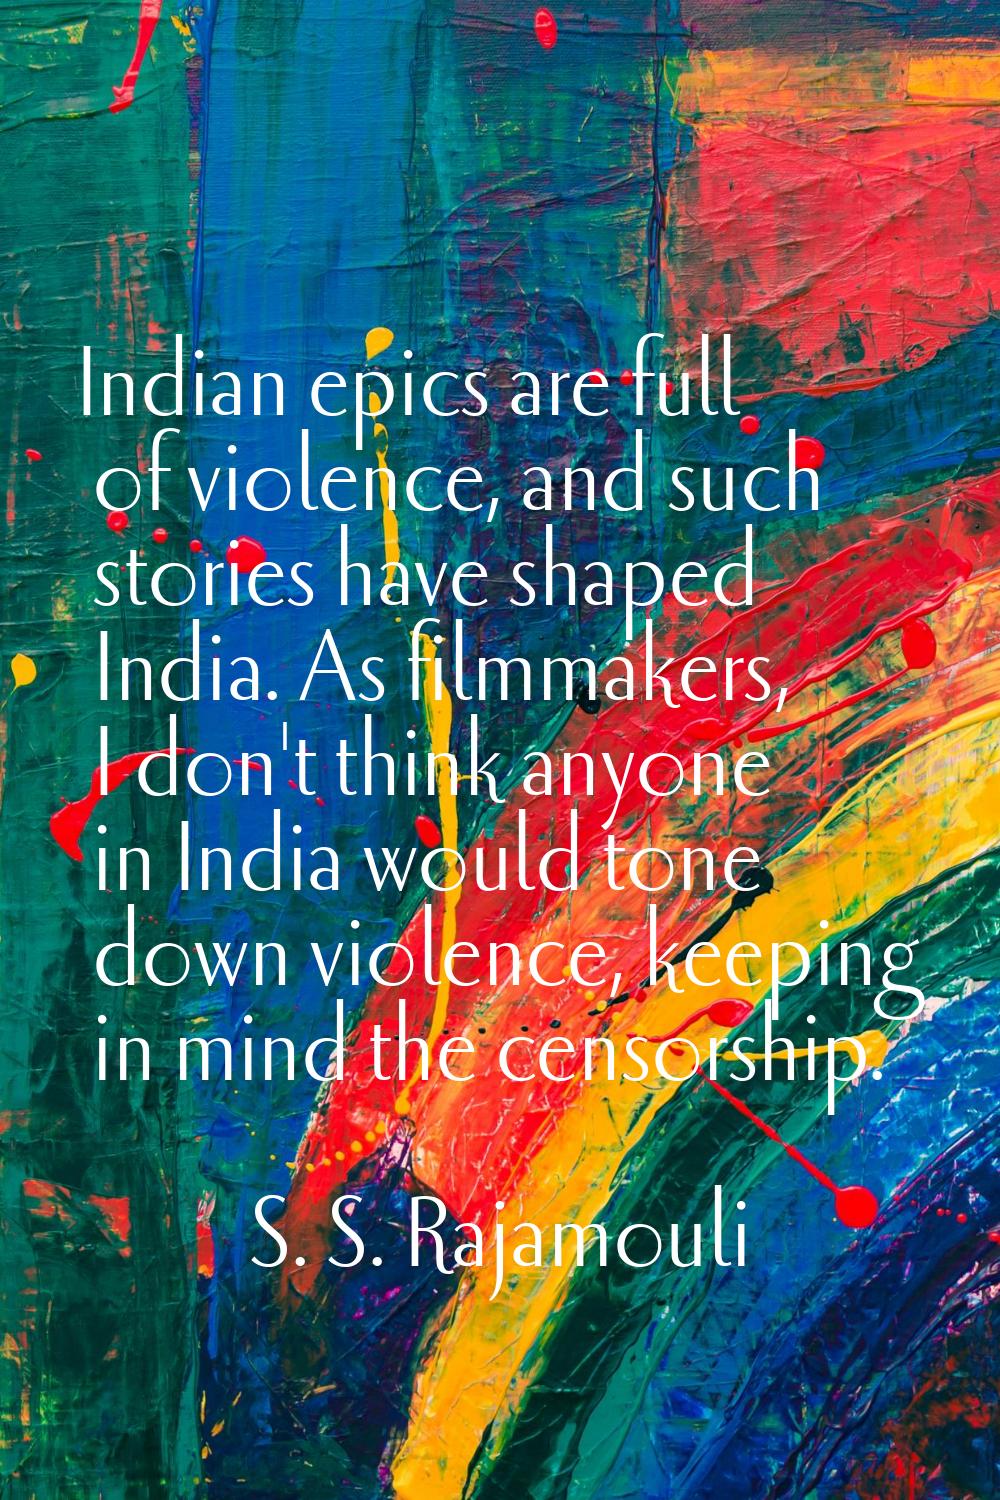 Indian epics are full of violence, and such stories have shaped India. As filmmakers, I don't think